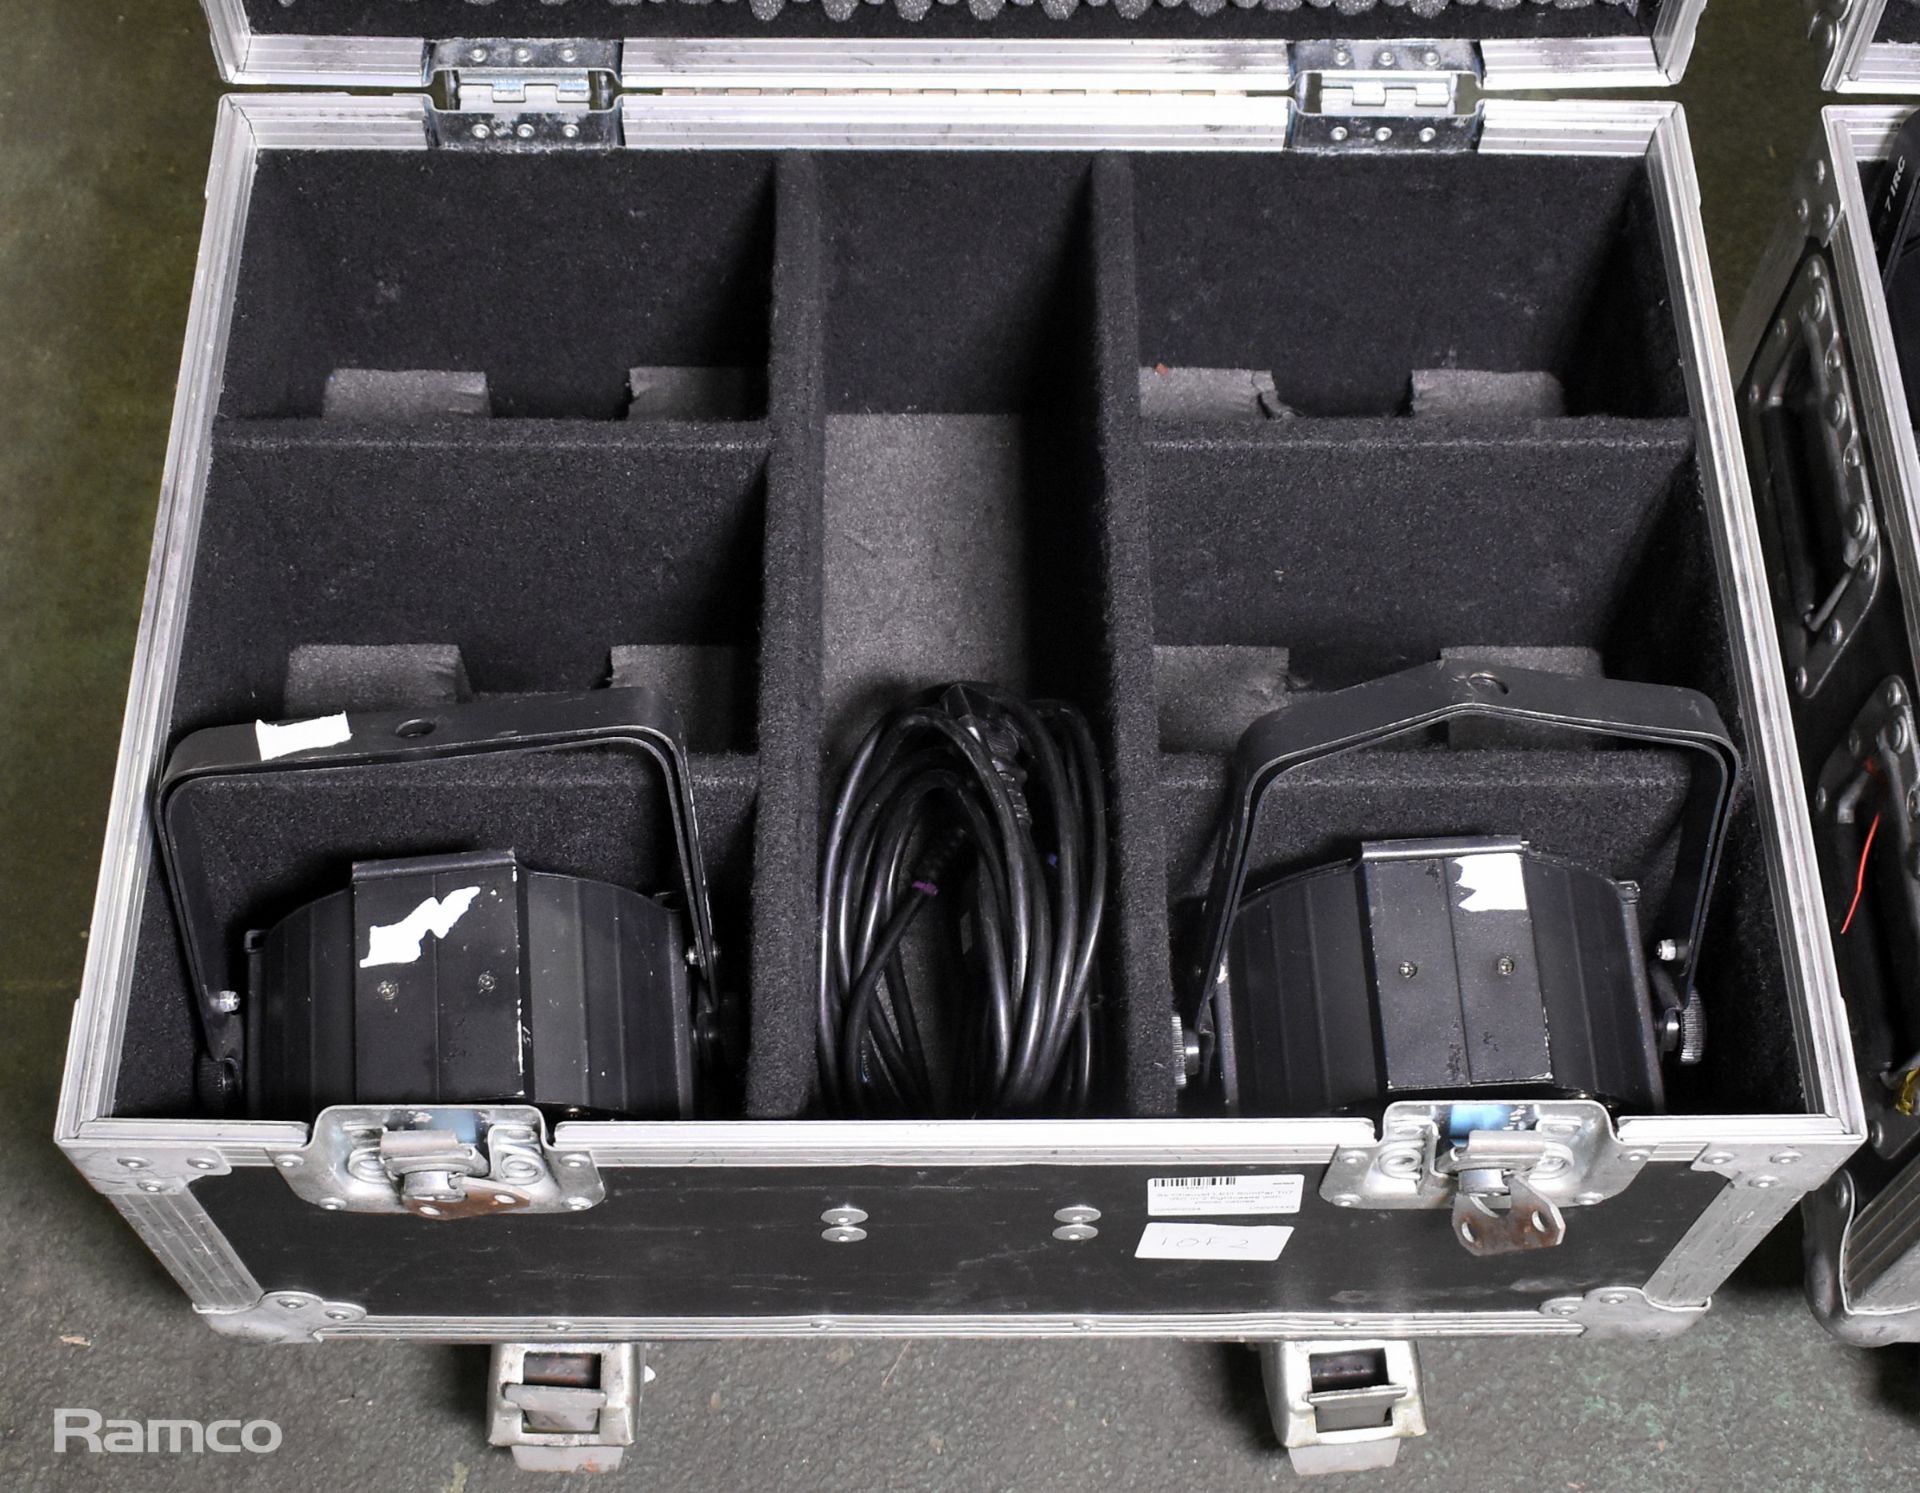 8x Chauvet LED SlimPar Tri7 IRC over 2 flight cases with power cables - Image 2 of 13